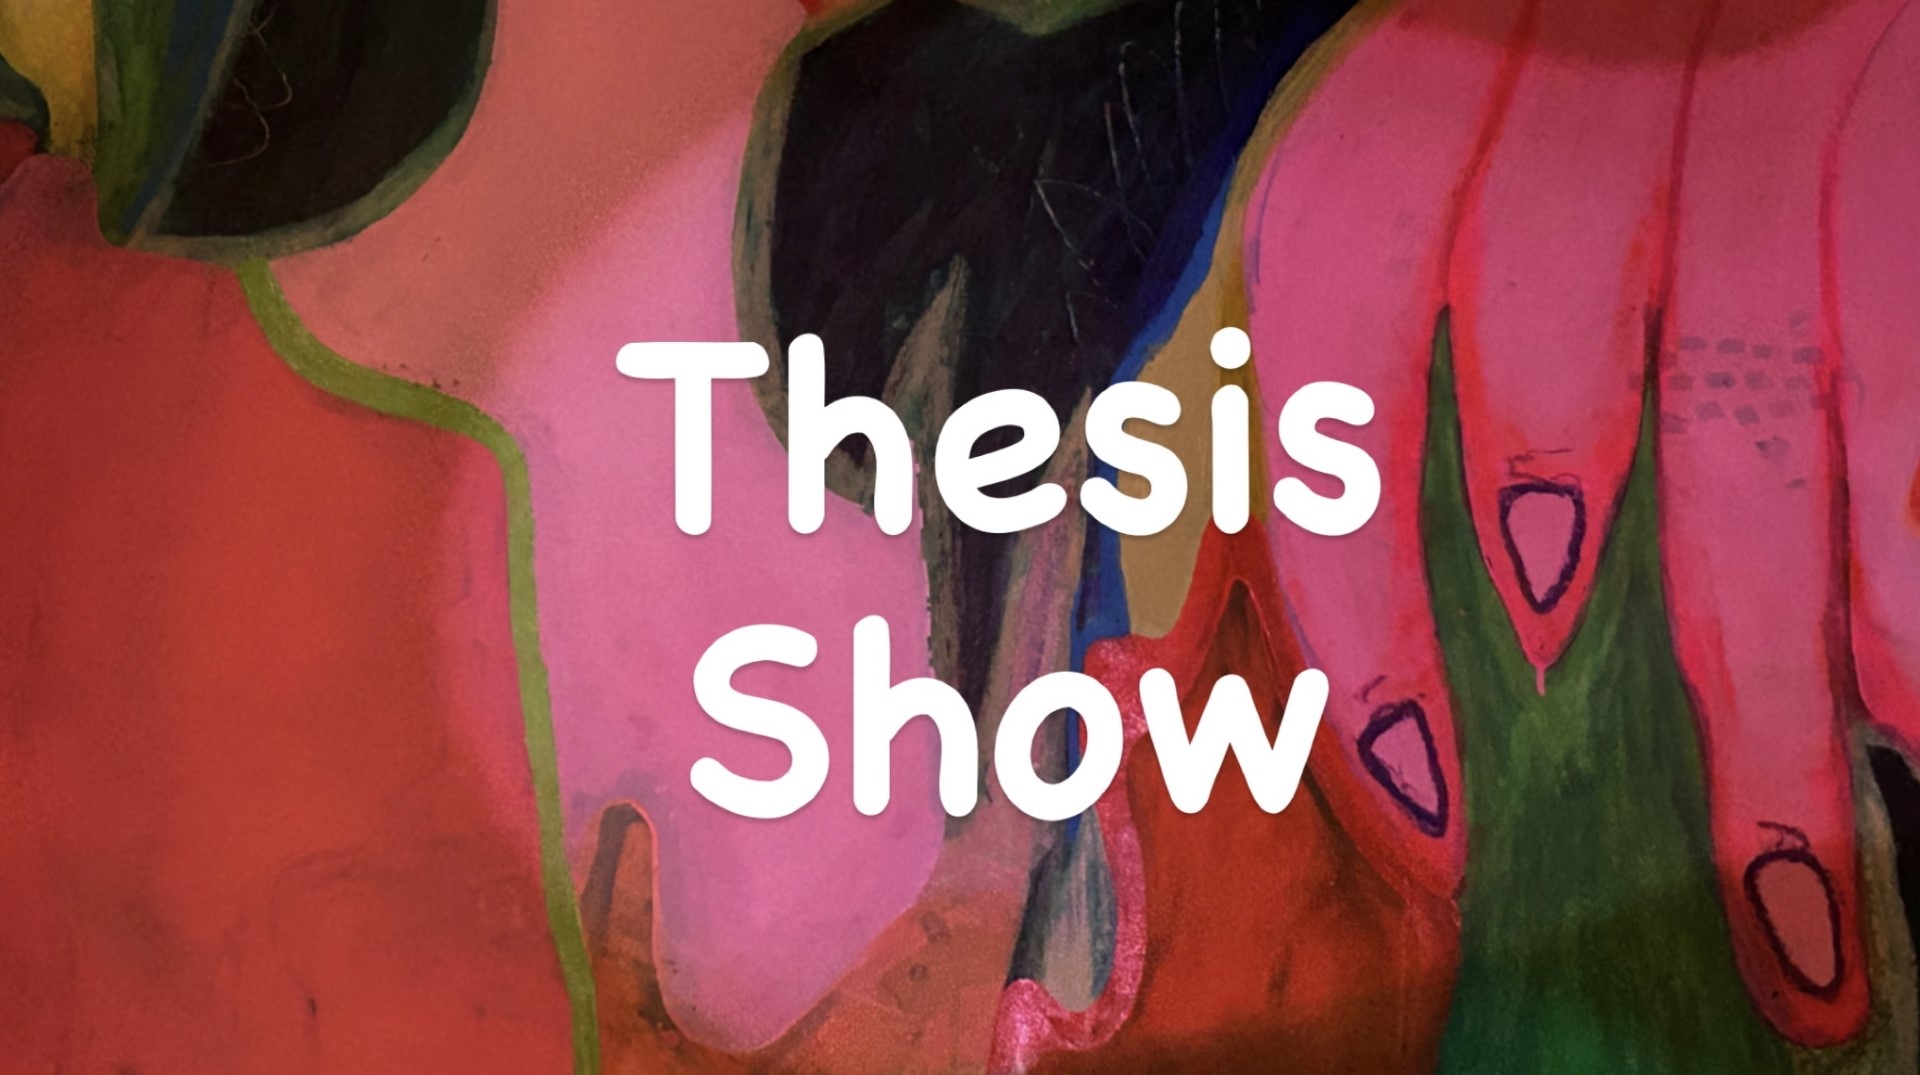 Worde Thesis Show in center with pink painting behind